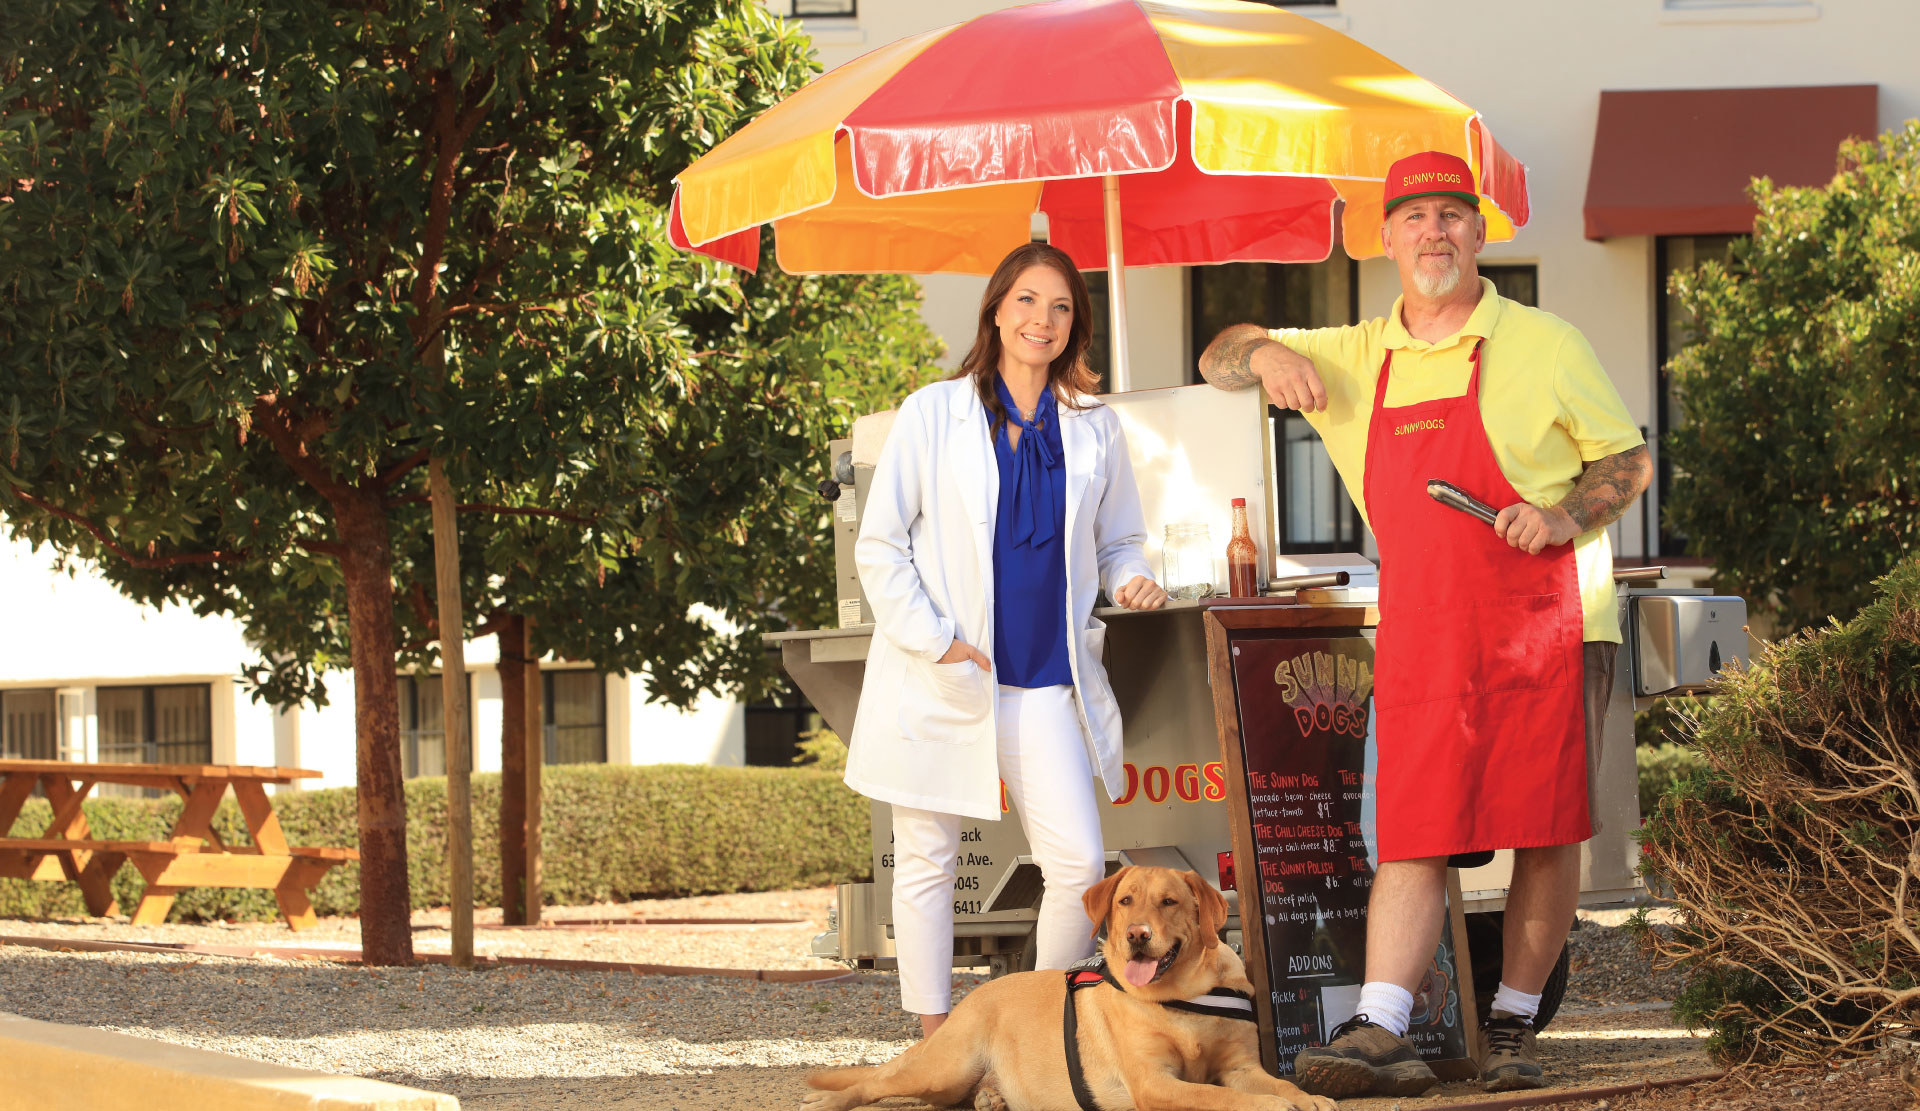 With the help of Paige Vega, speech pathologist, James Womack started a new business, Sunny Dogs. 